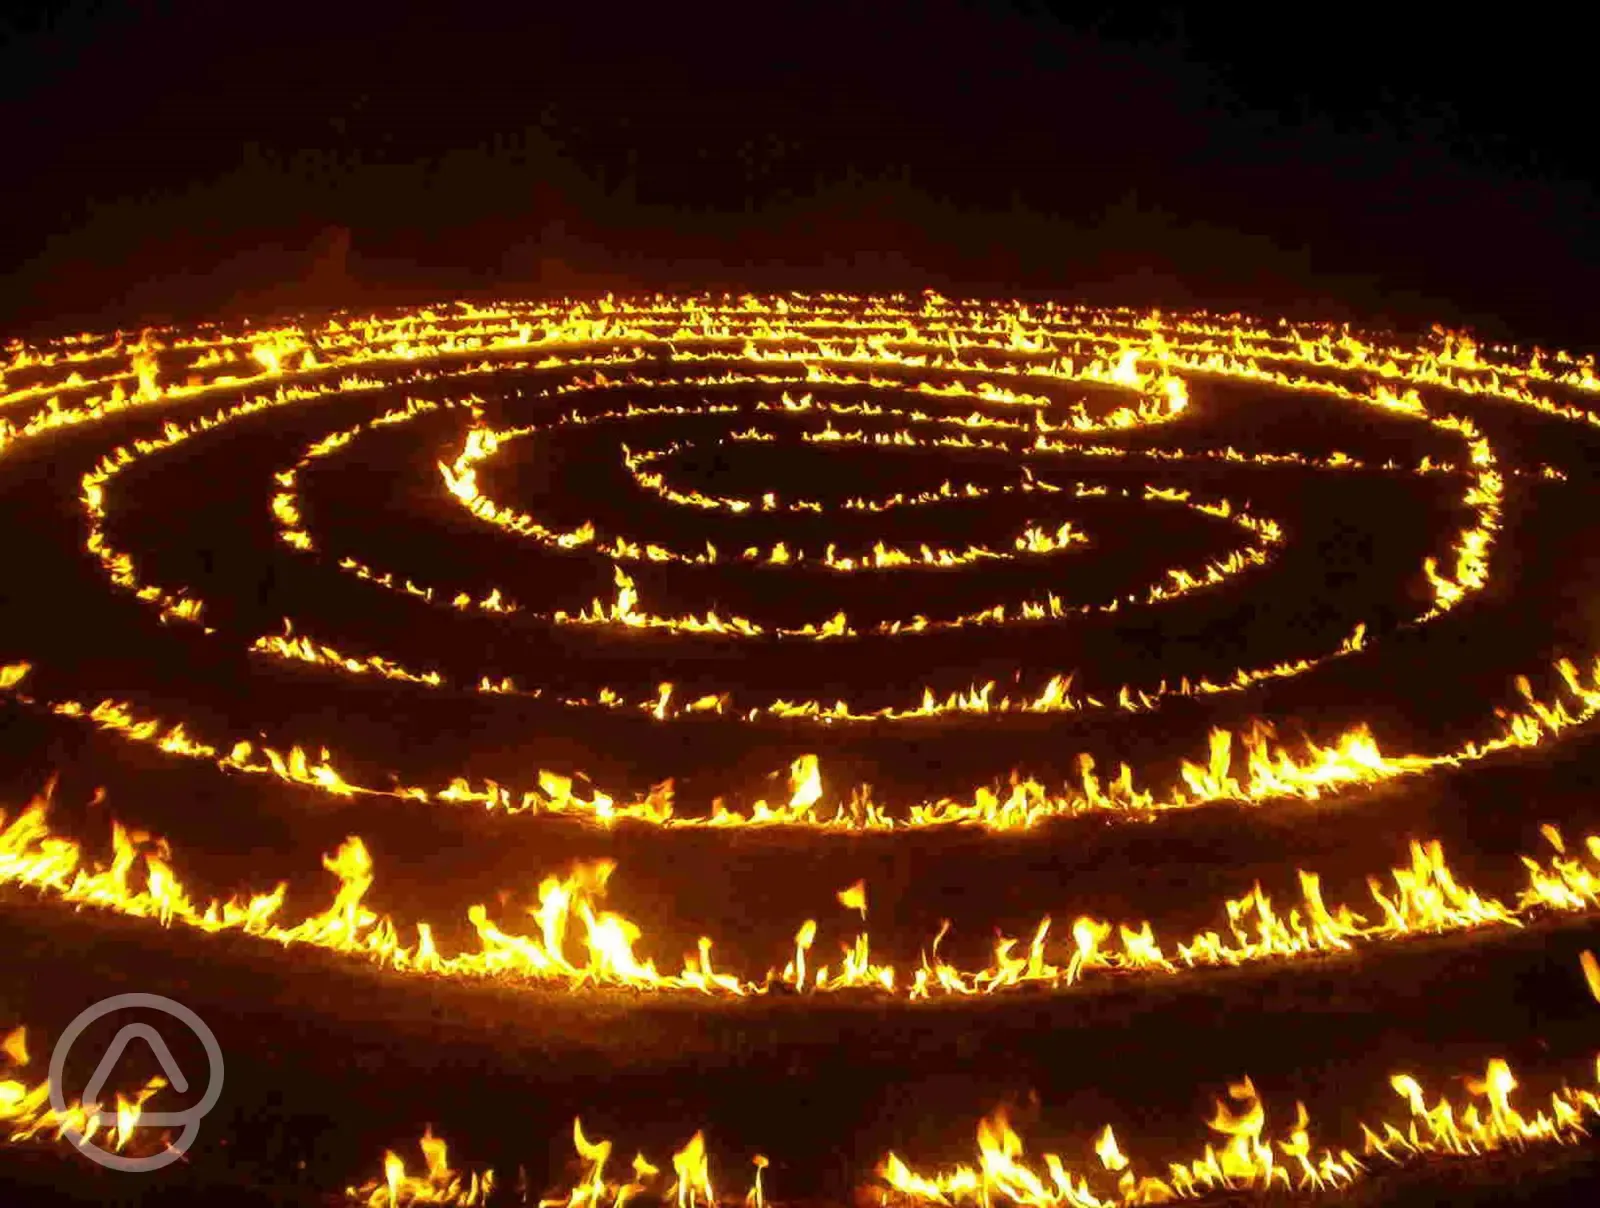 The Fire Labyrinth